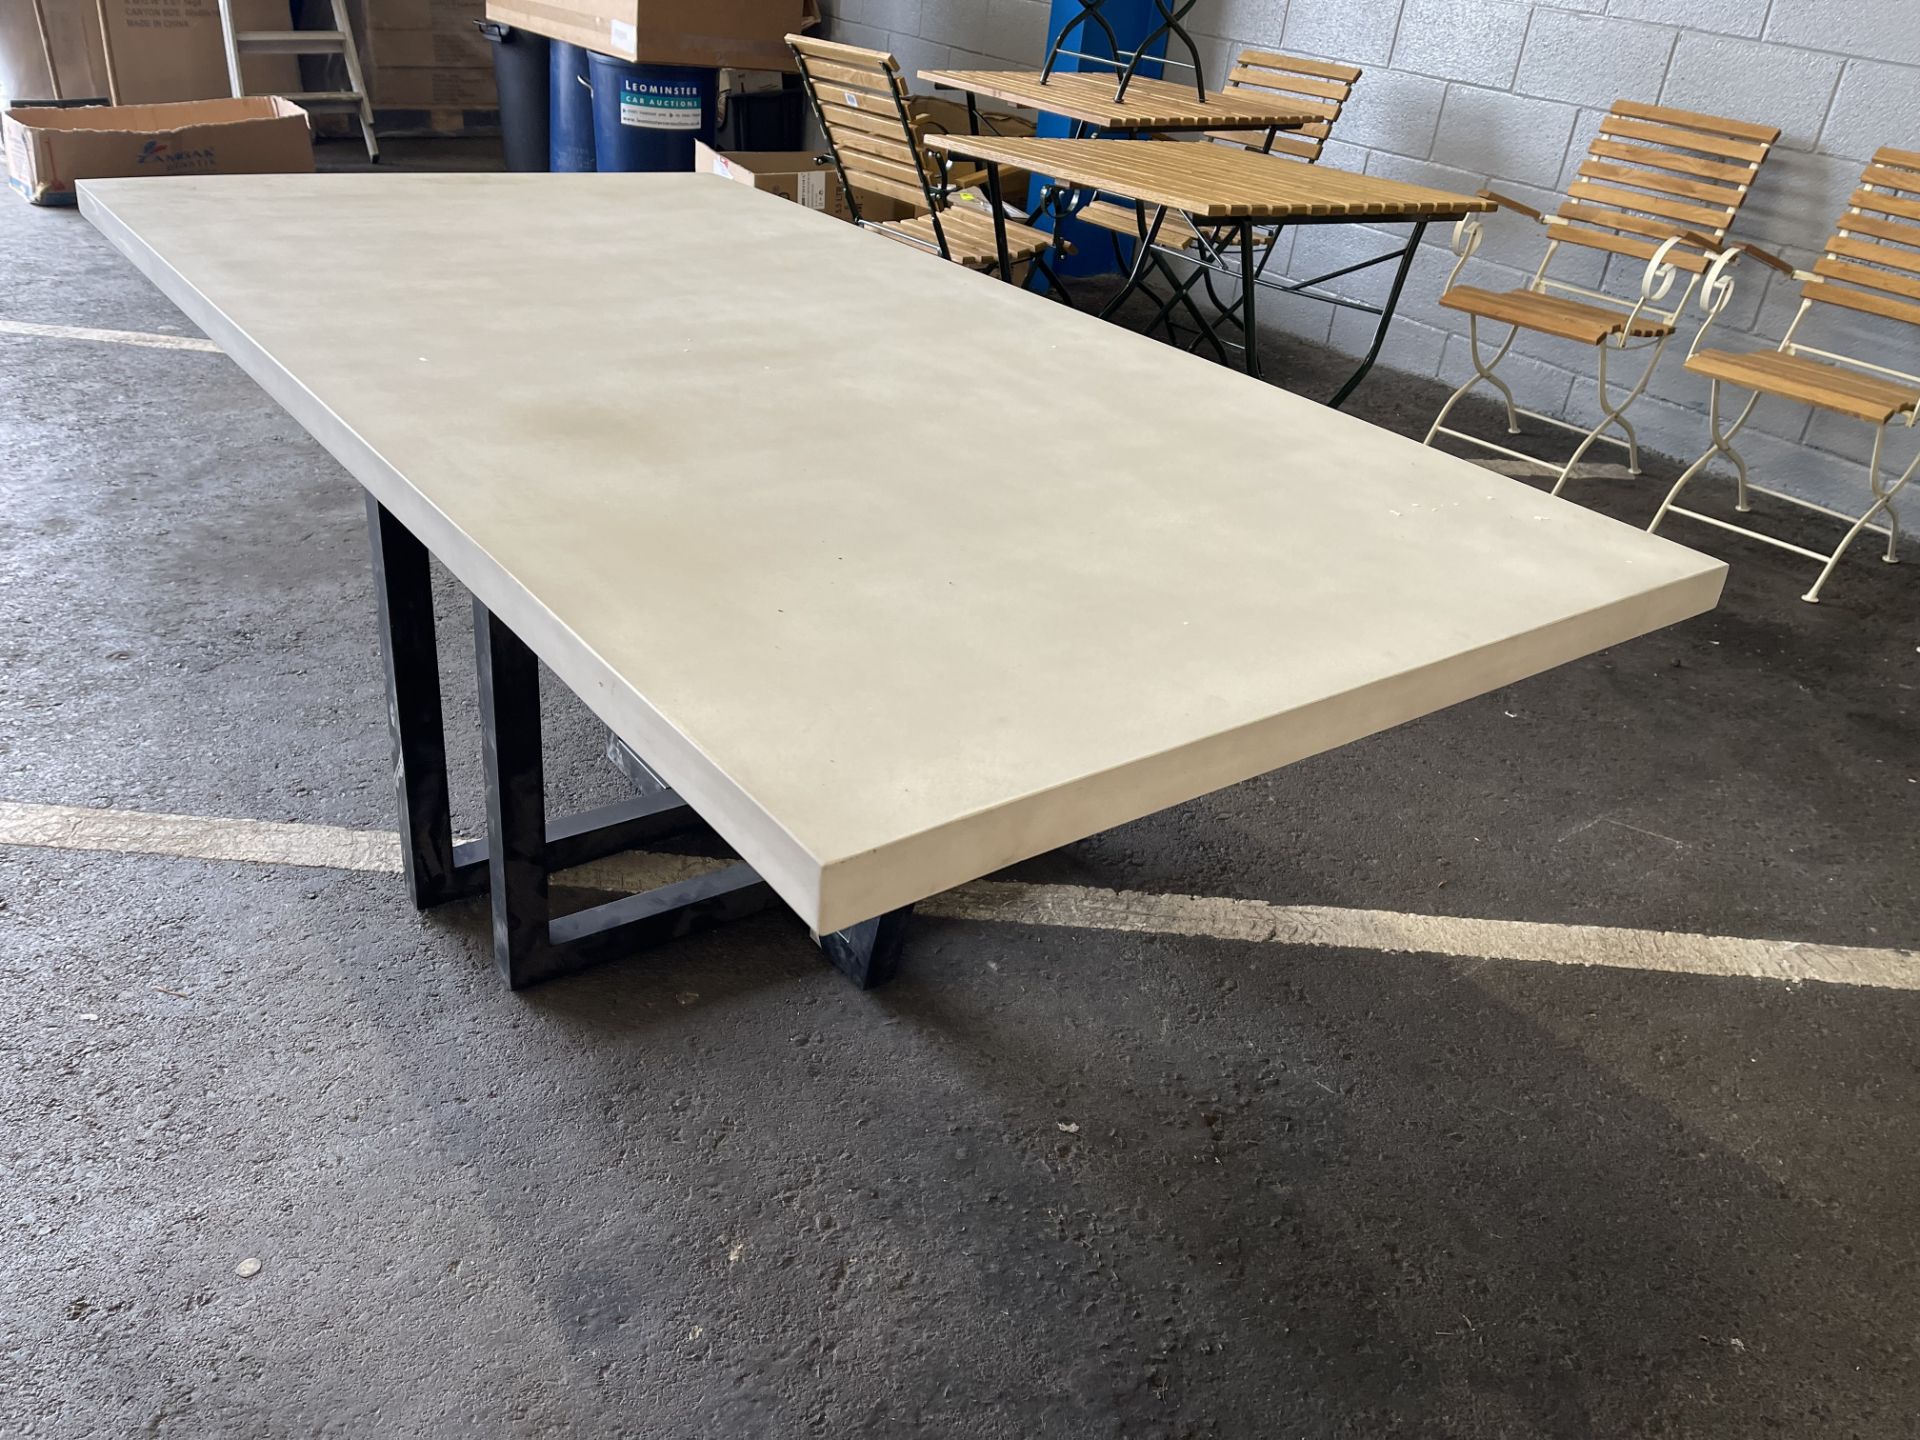 Dunelm Concrete Dining Table 190 x 100cm - RRP £550 (All Boxed But Table Tops May Be Have Marks) - Image 2 of 2